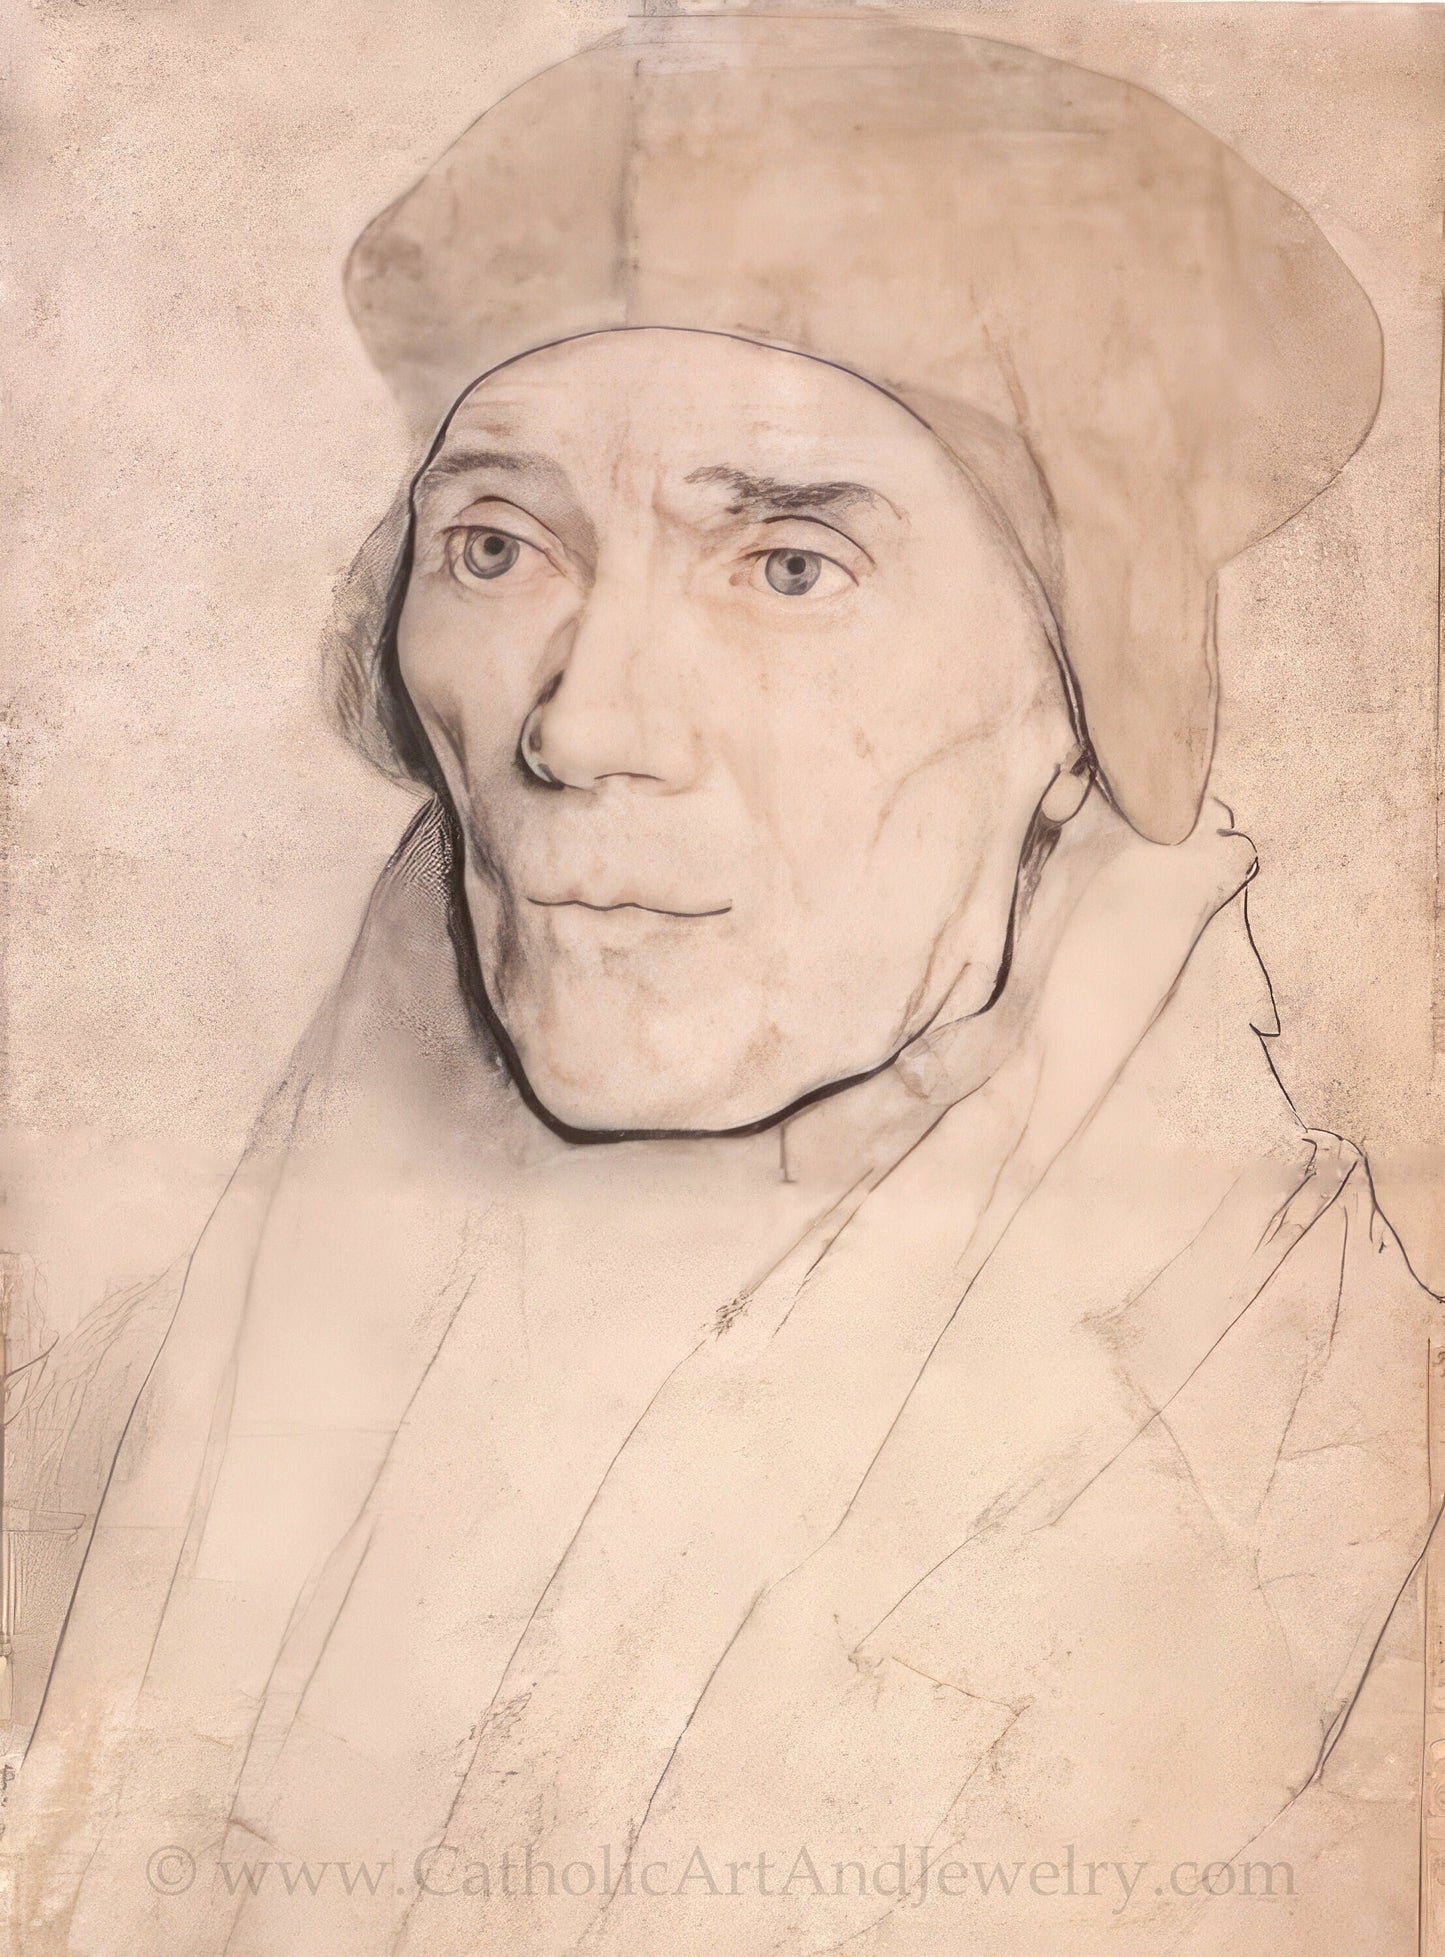 New! St. John Fisher, Bishop and Martyr – Catholic Art – Archival Quality